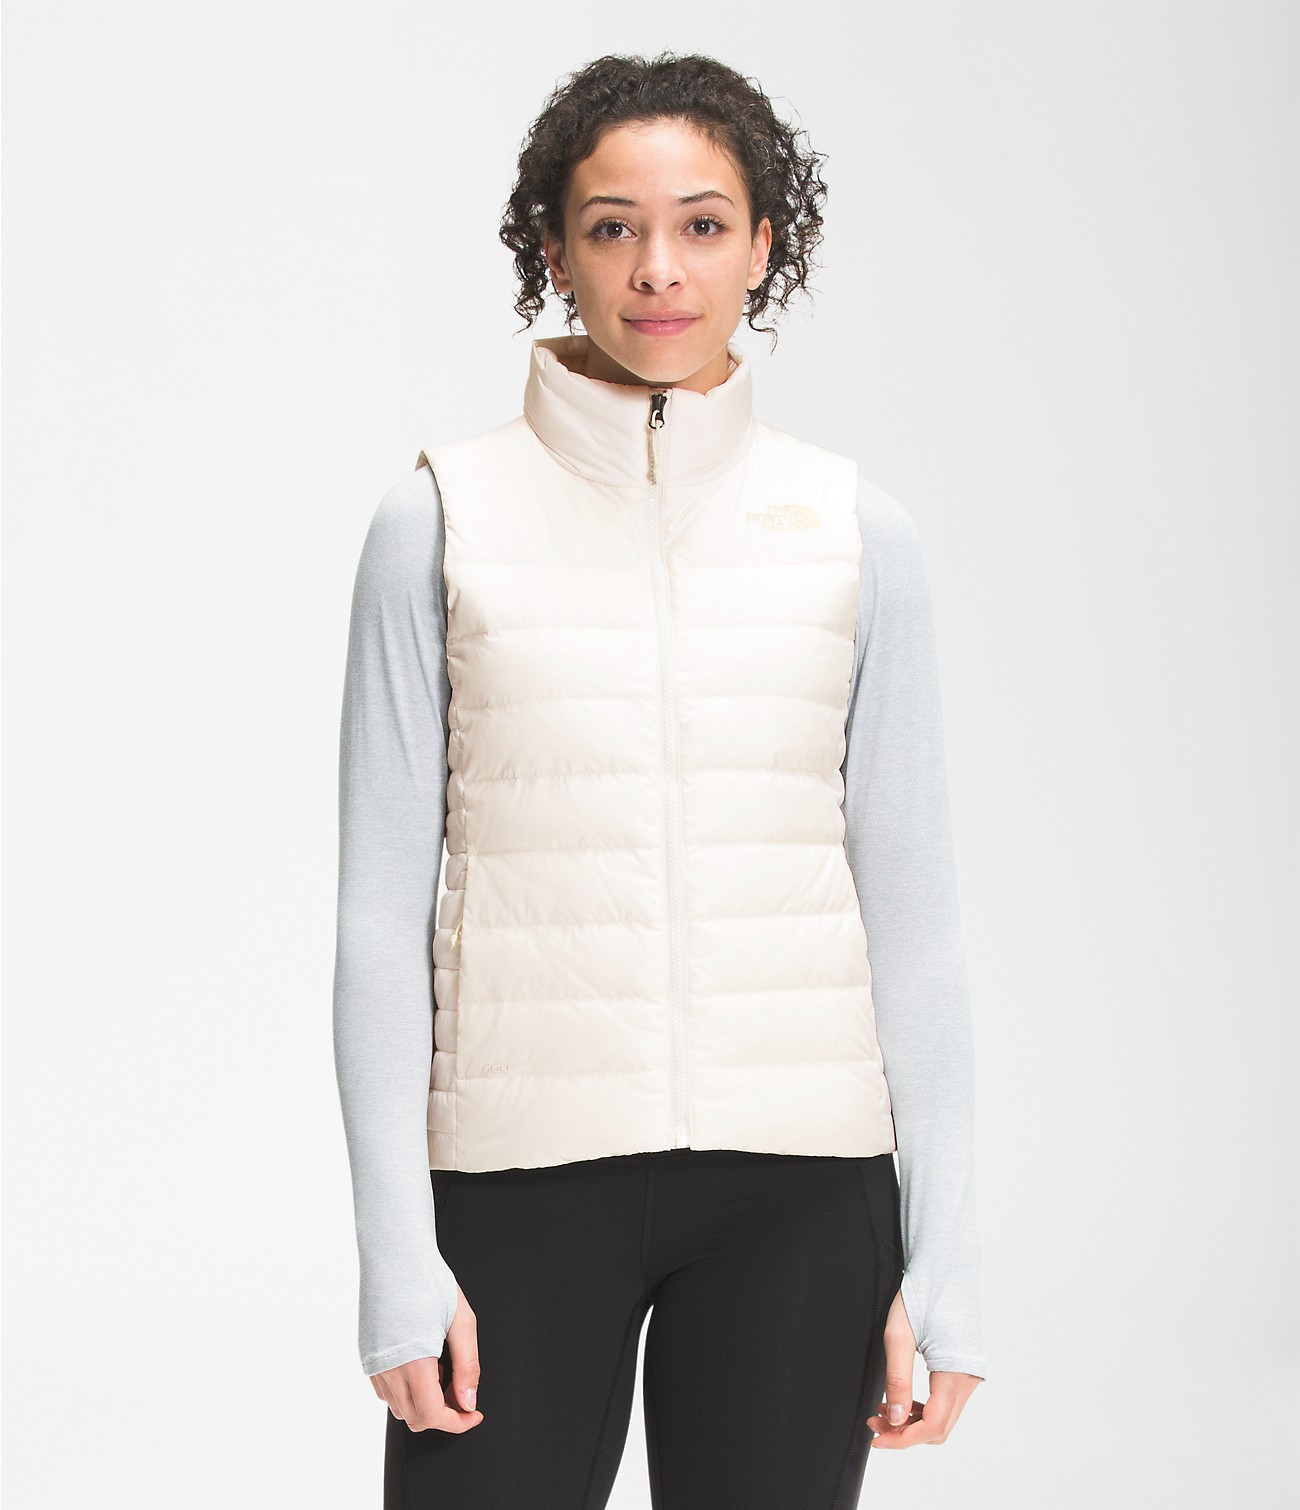 Unlock Wilderness' choice in the Canada Goose Vs North Face comparison, the Aconcagua Vest by The North Face